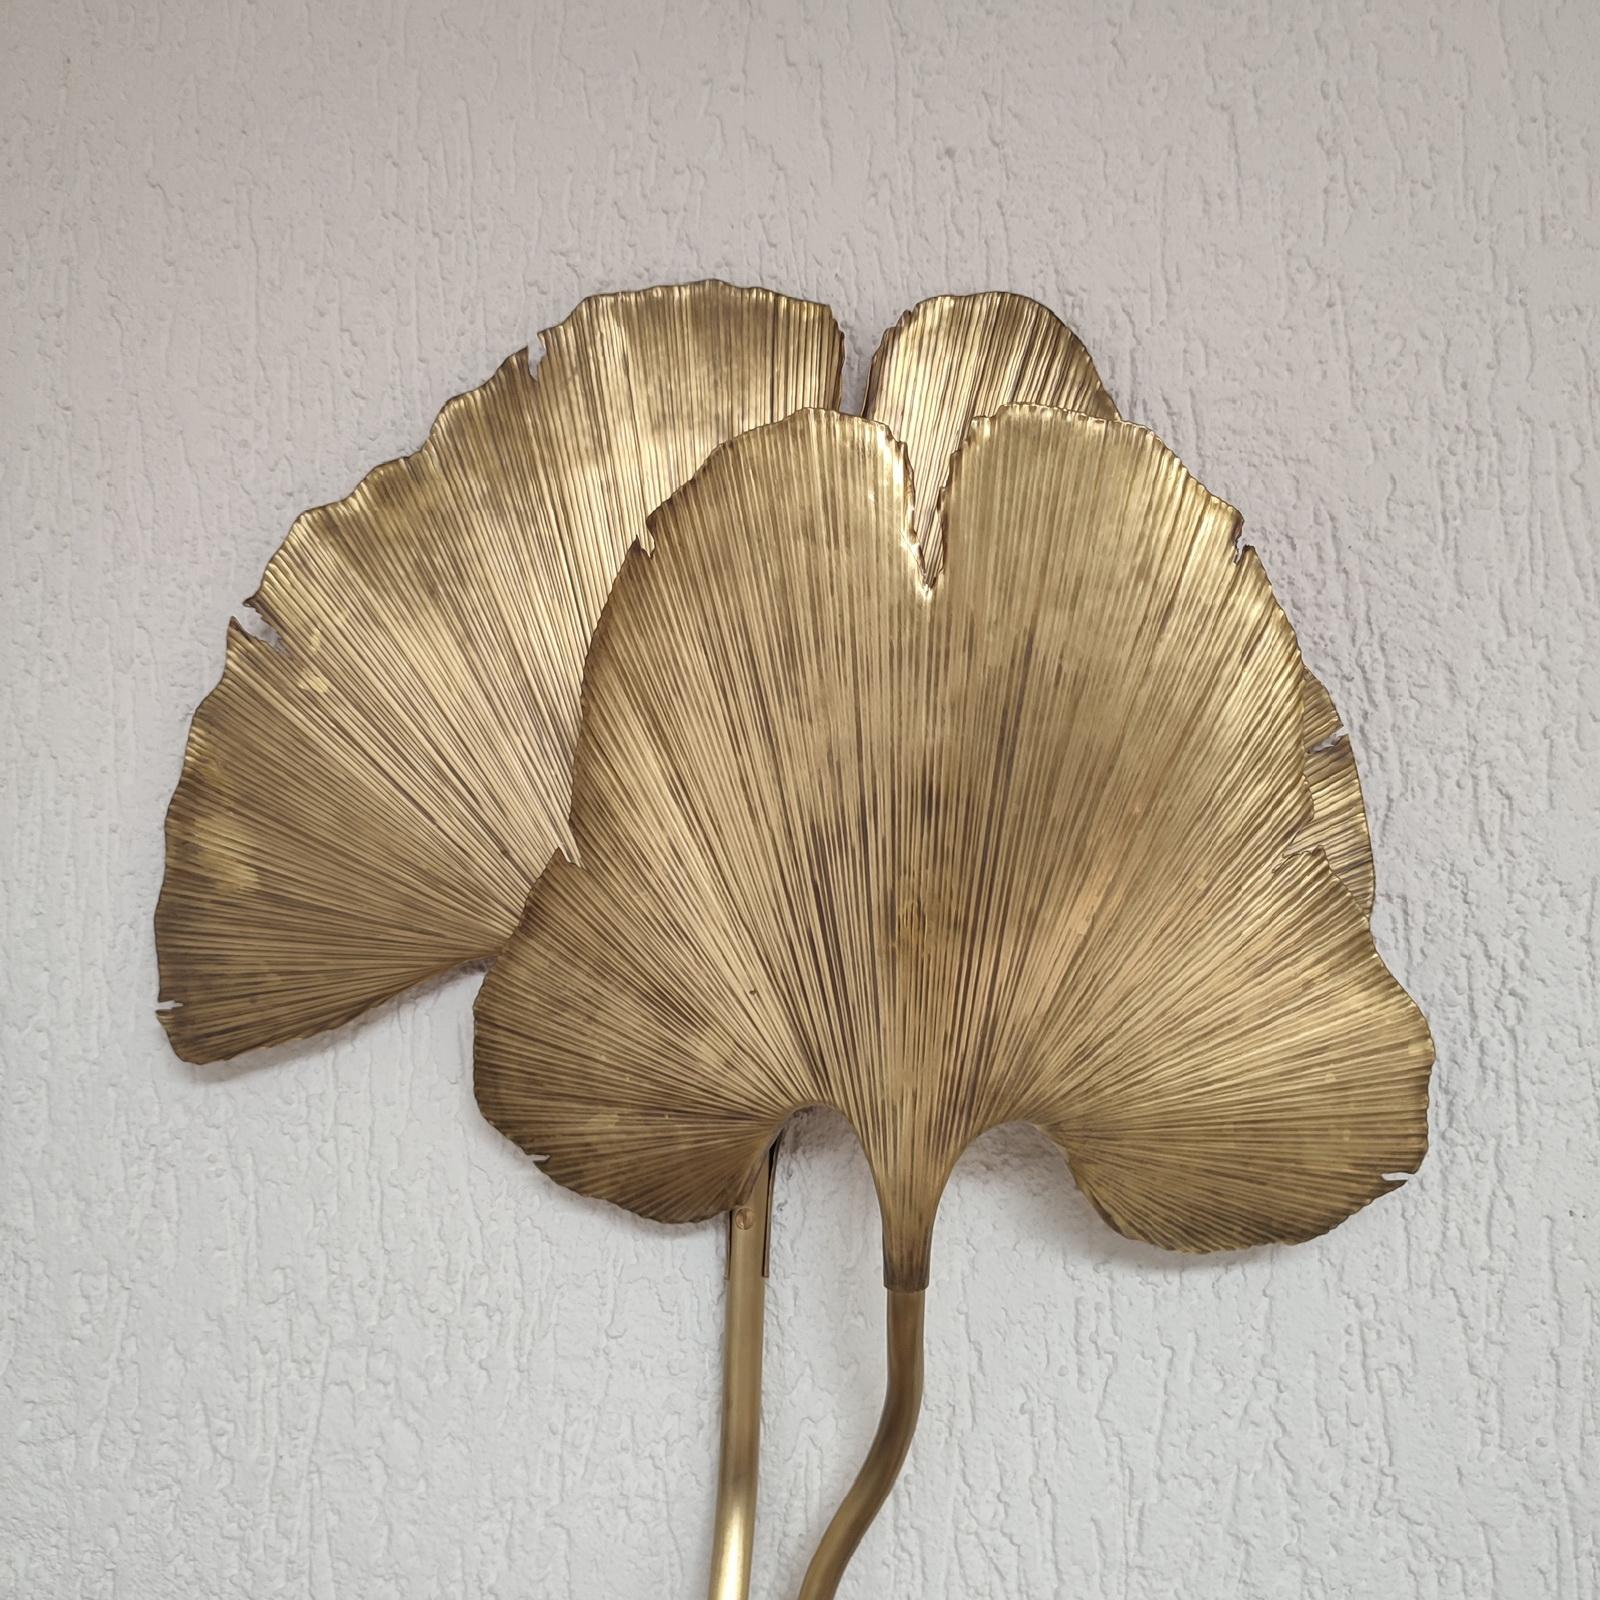 Italian Mid-Century Modern Style Large Brass Wall Light Ginkgo Leaves Organic Shaped For Sale